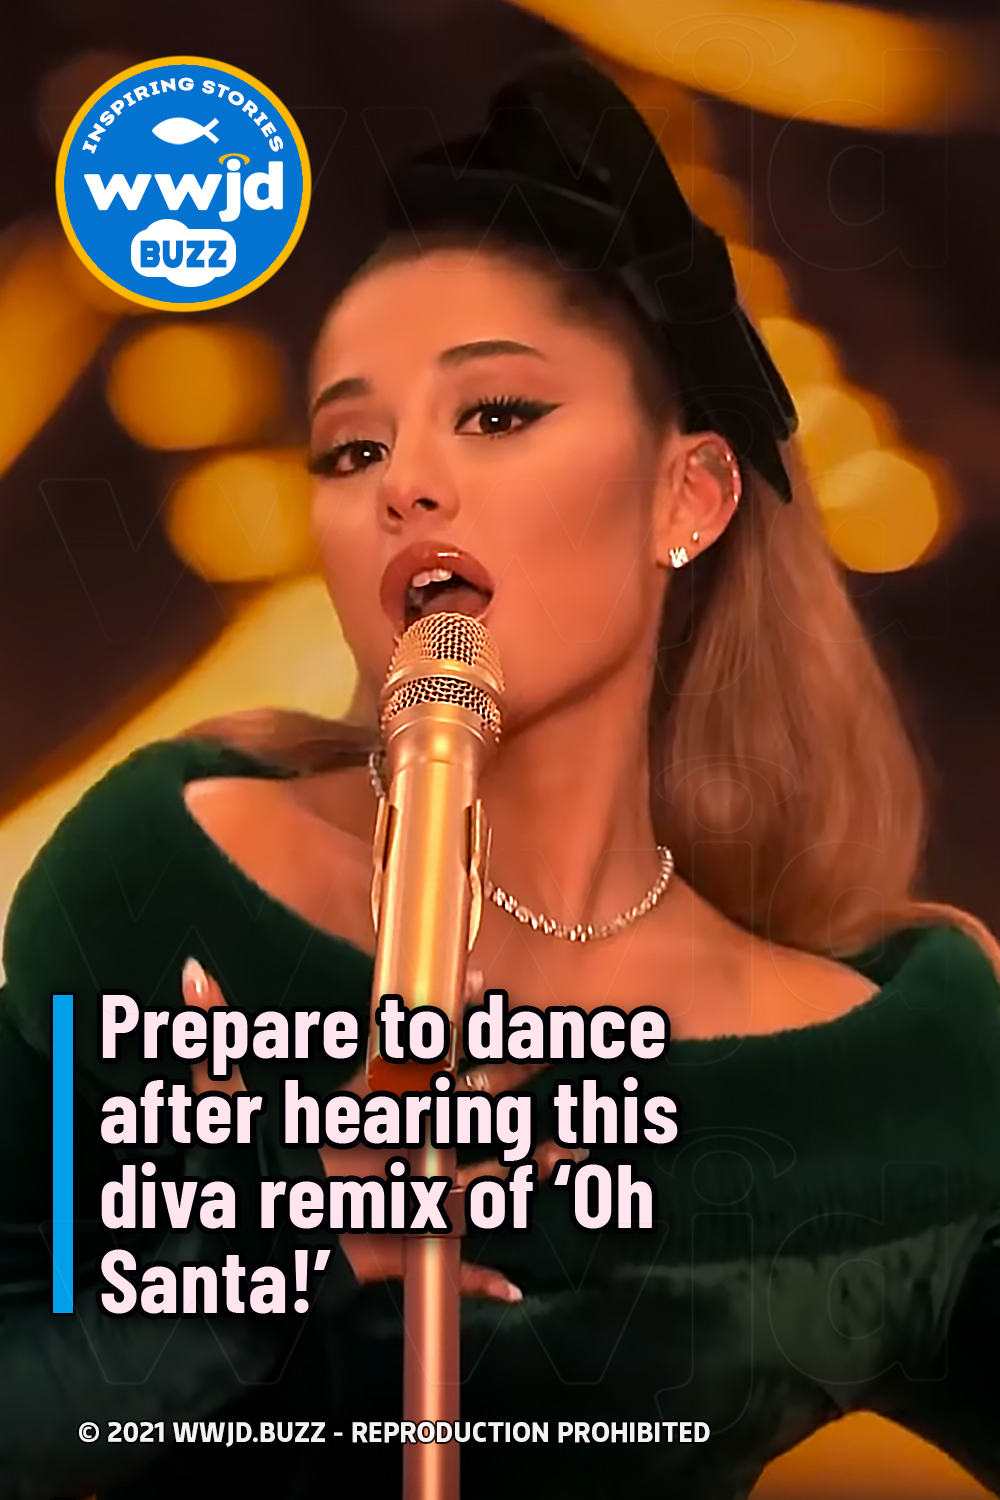 Prepare to dance after hearing this diva remix of ‘Oh Santa!’